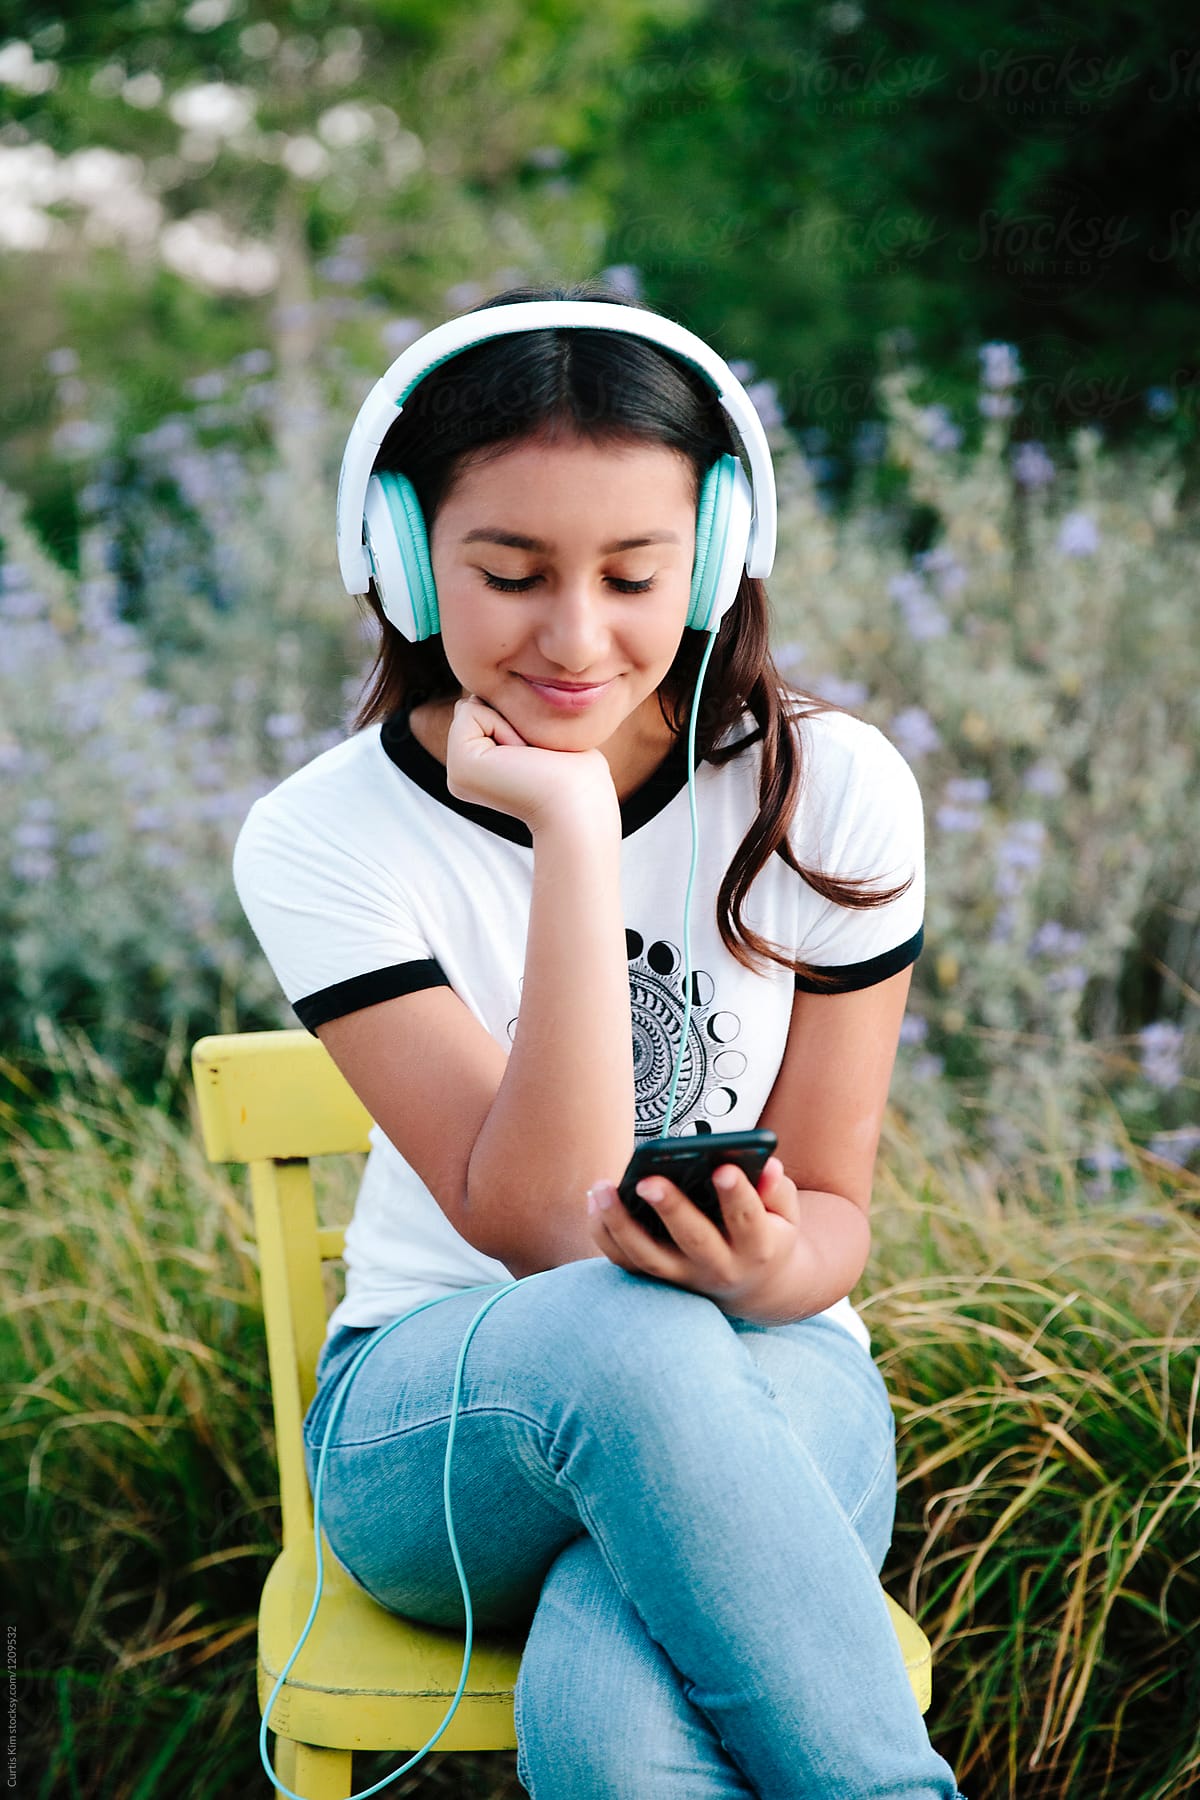 Pretty teenage girl wearing headset and holding mobile phone